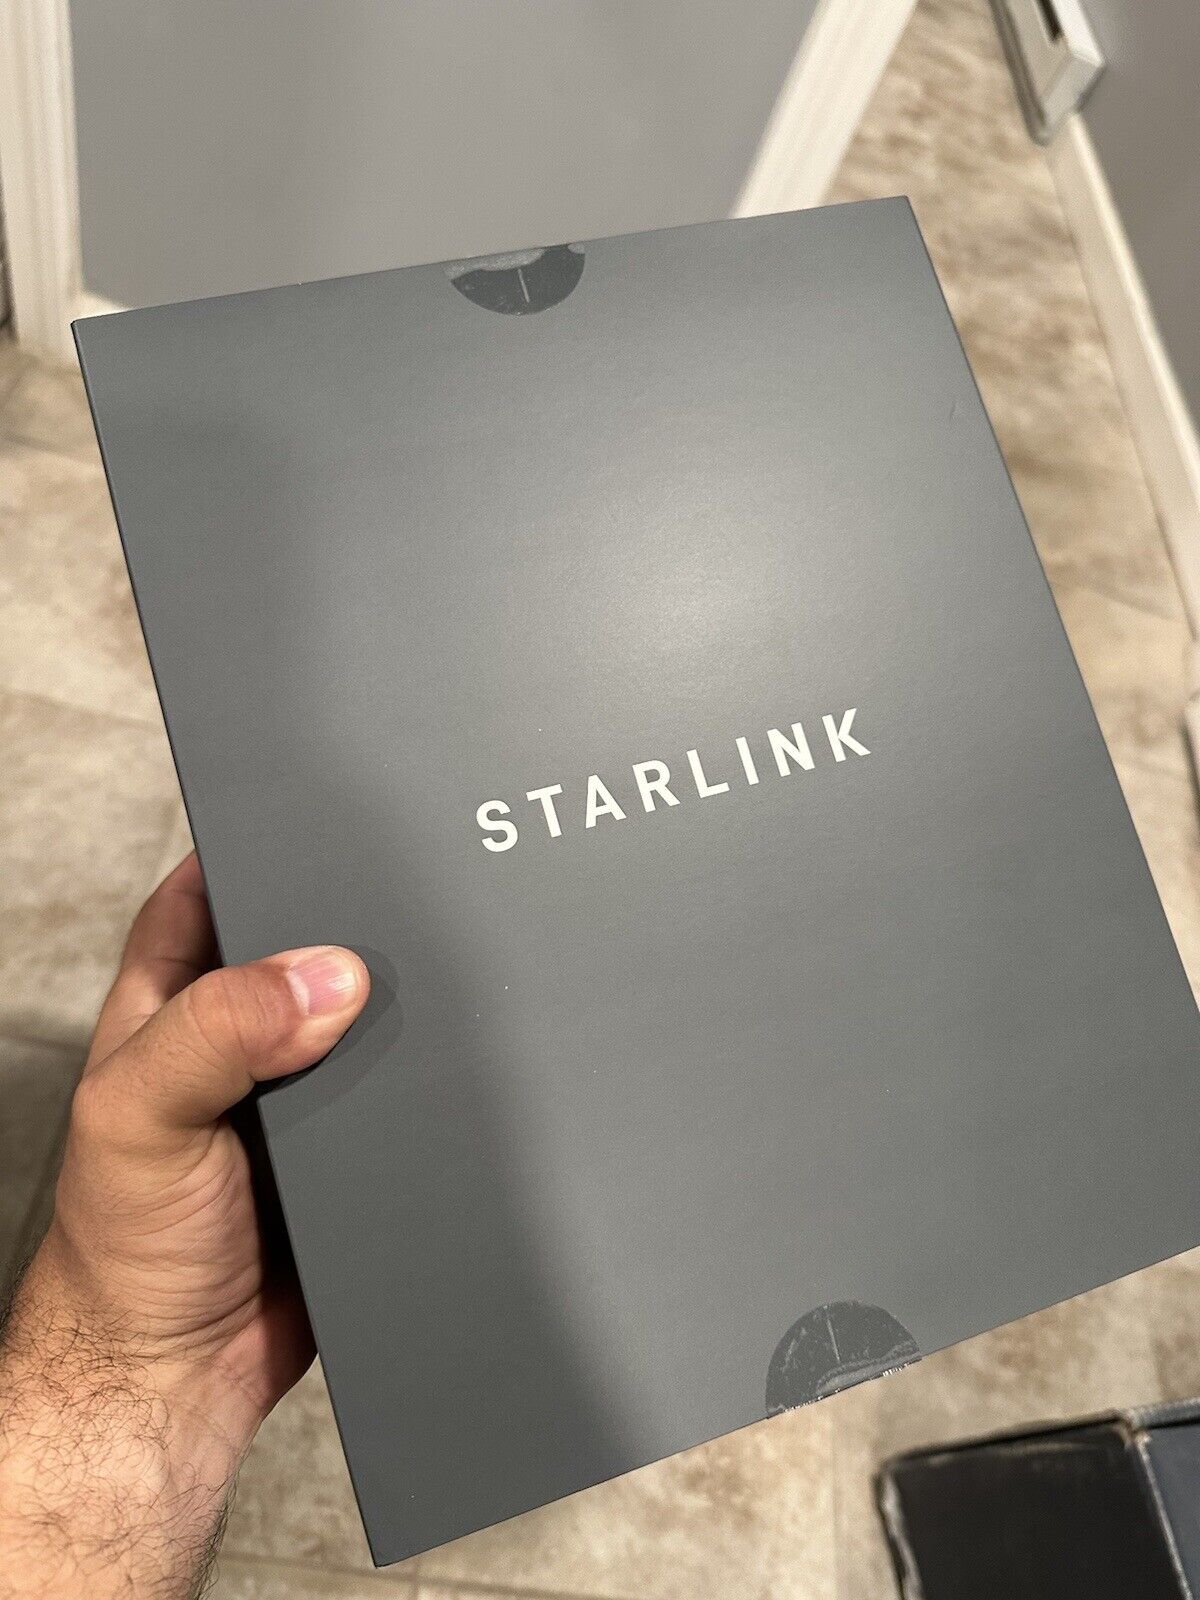 *NEW* STARLINK MESH WIFI ROUTER FOR DISH V2